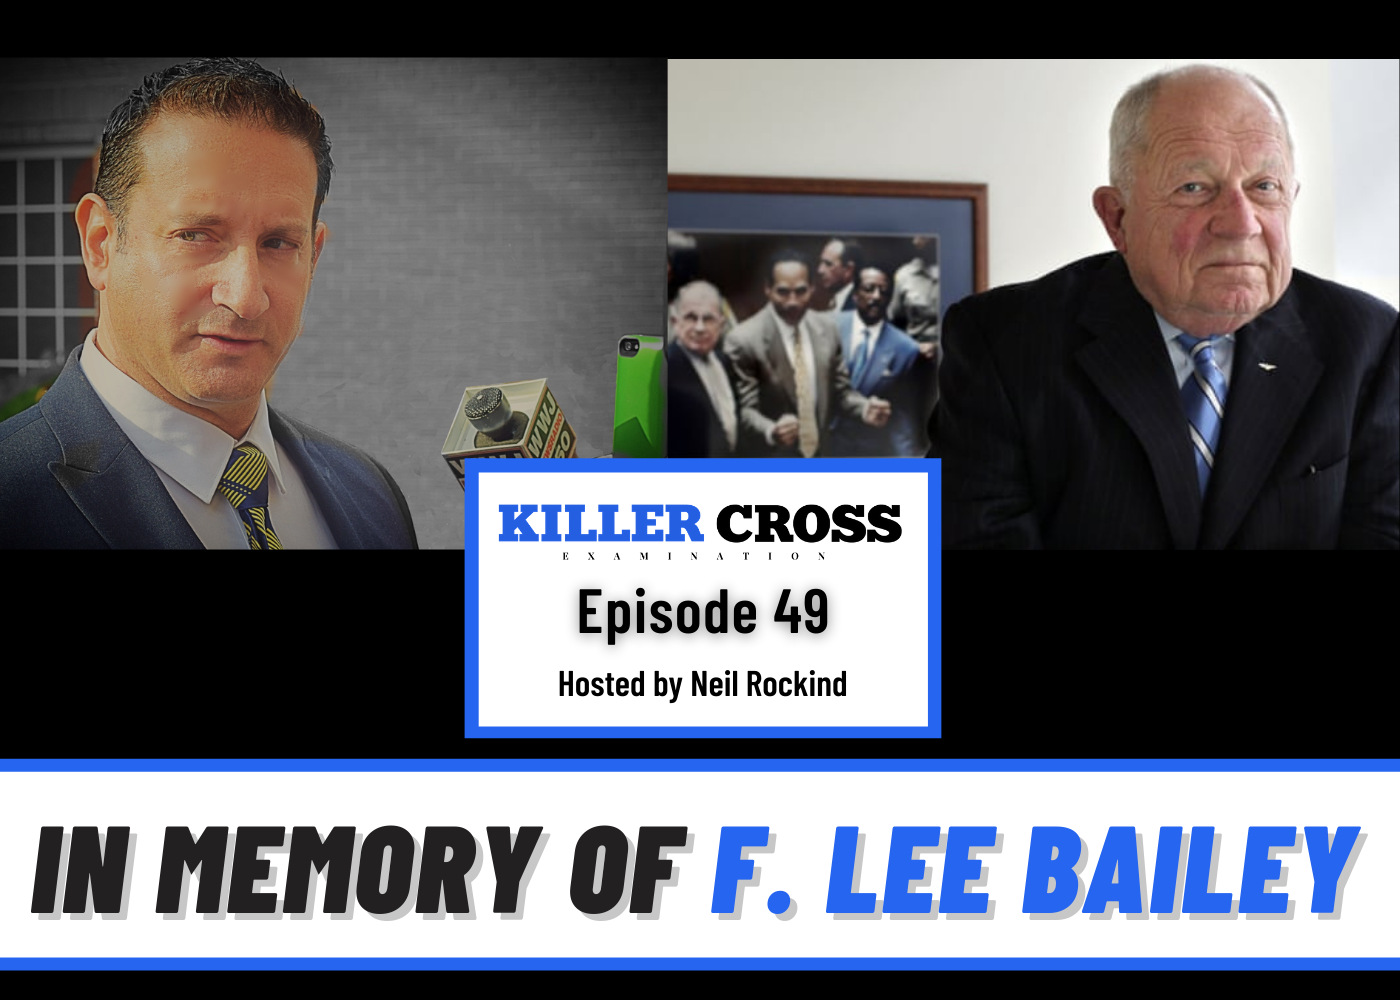 Episode 49: In Memory of F. Lee Bailey